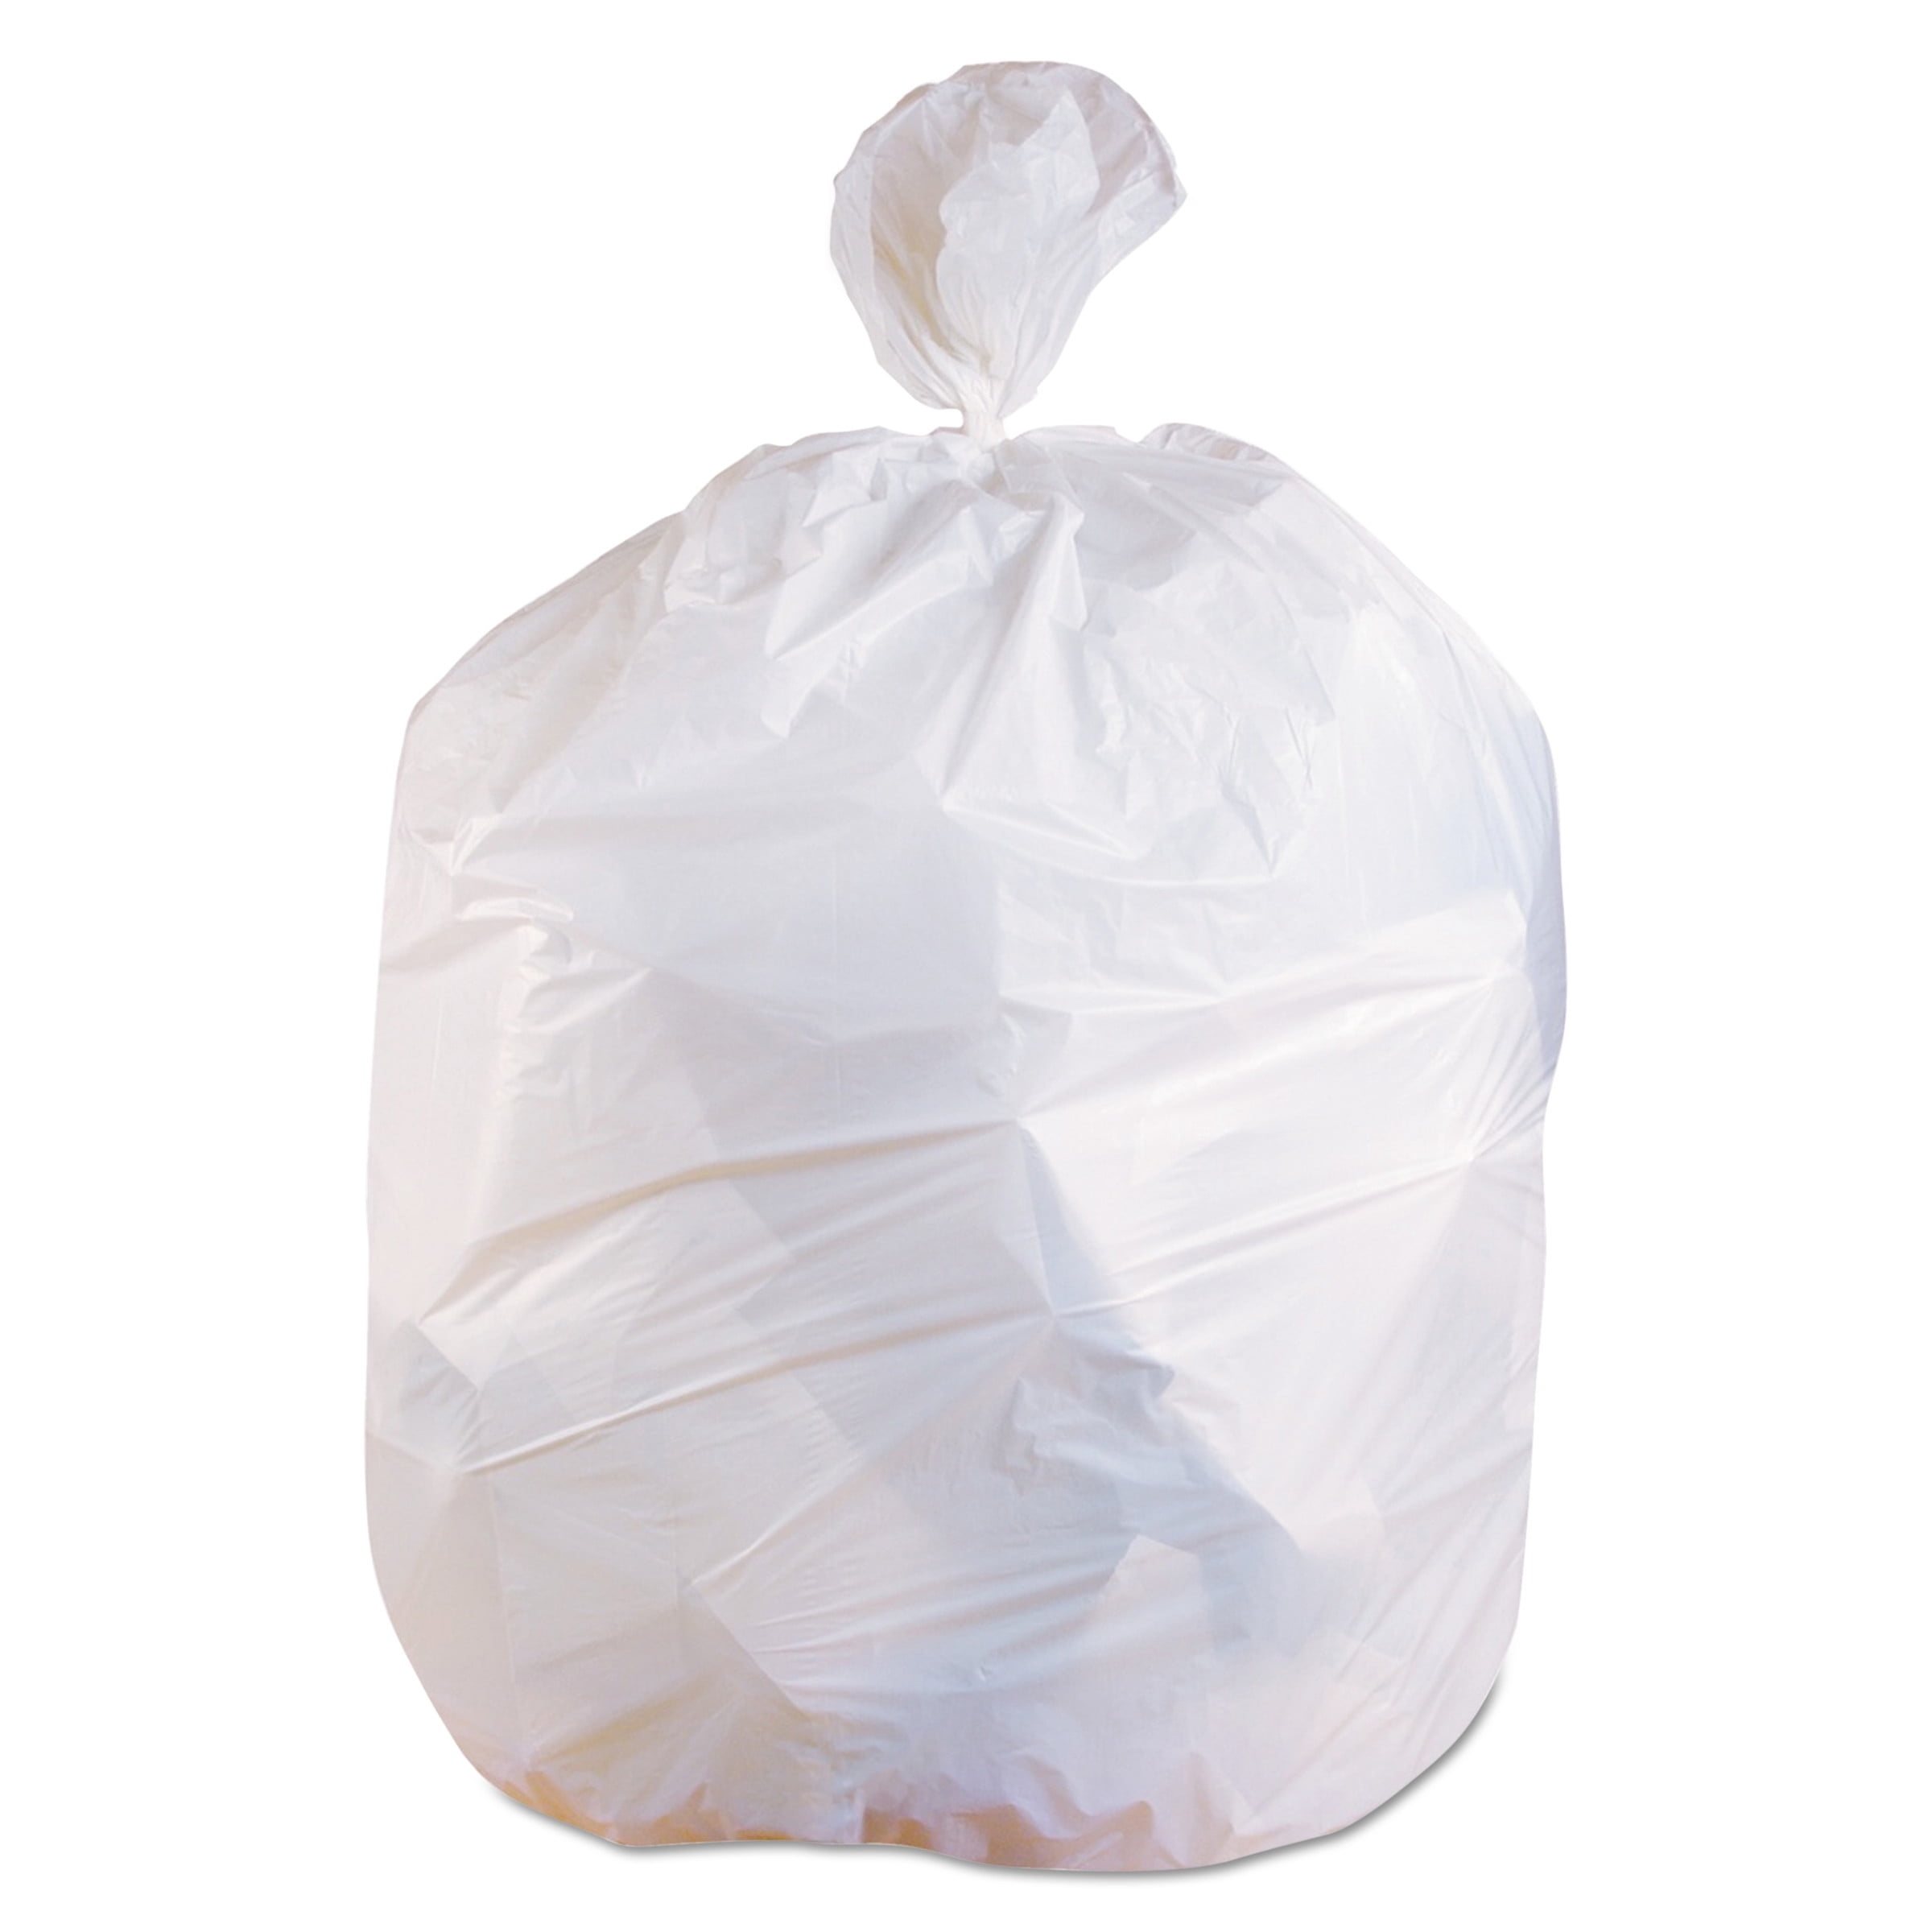 NAPS Polybag - High Density Poly Trash Liners/Bags with MicrobanÂ® - Clear  - 30 x 37, 13 Micron